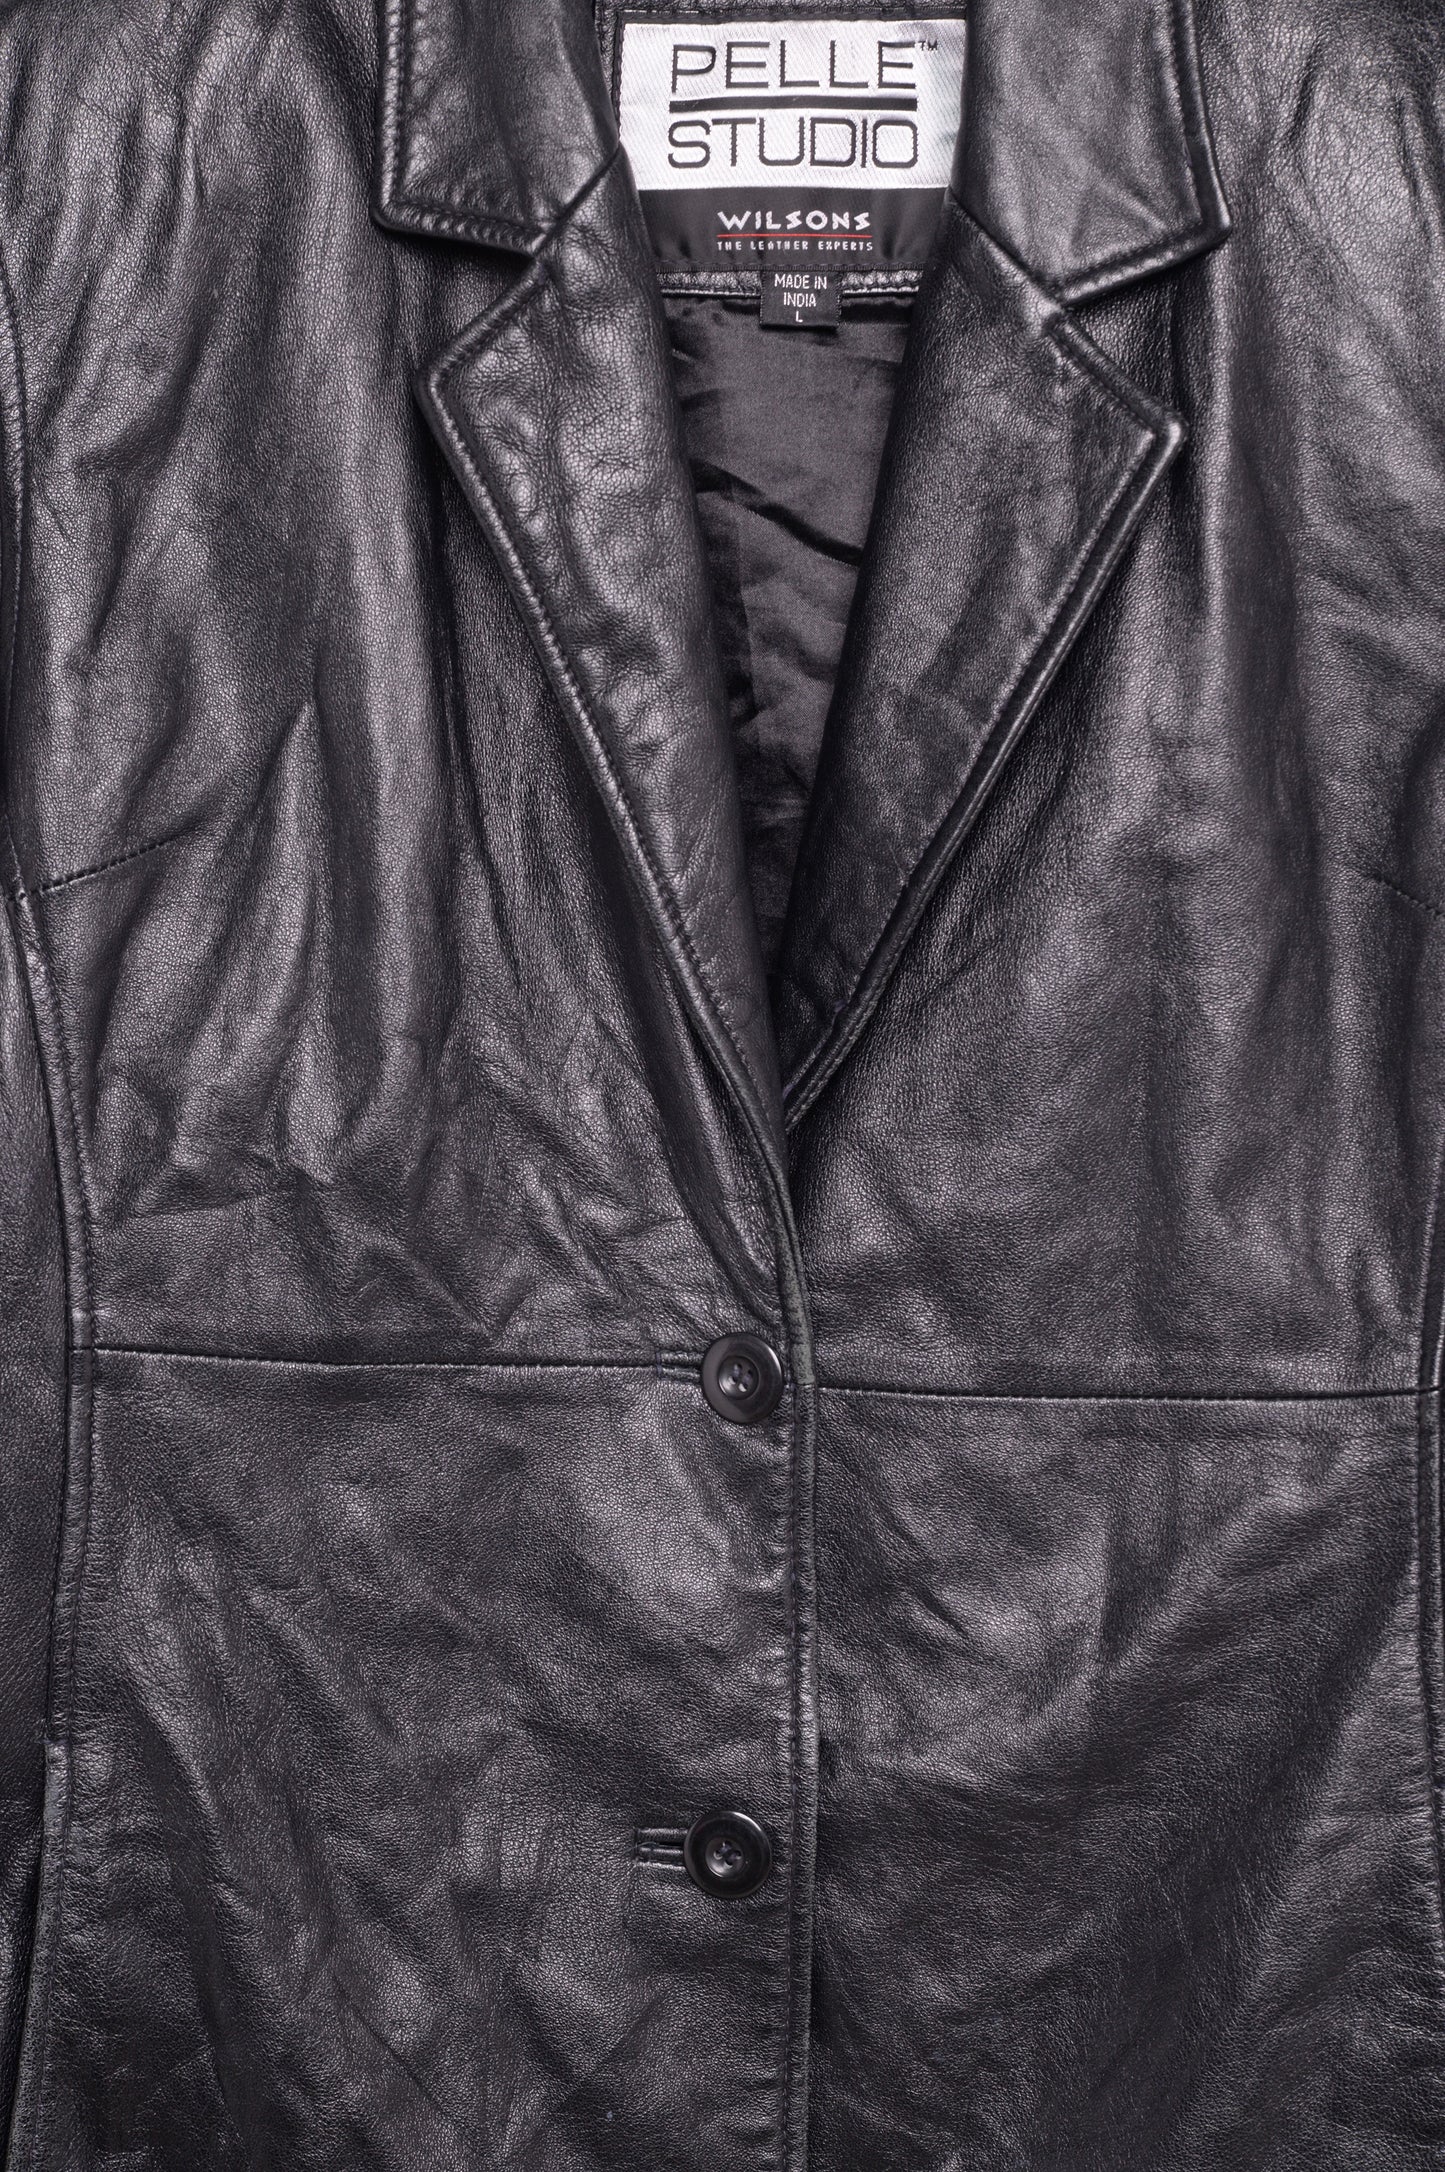 1990s Wilson's Soft Leather Jacket